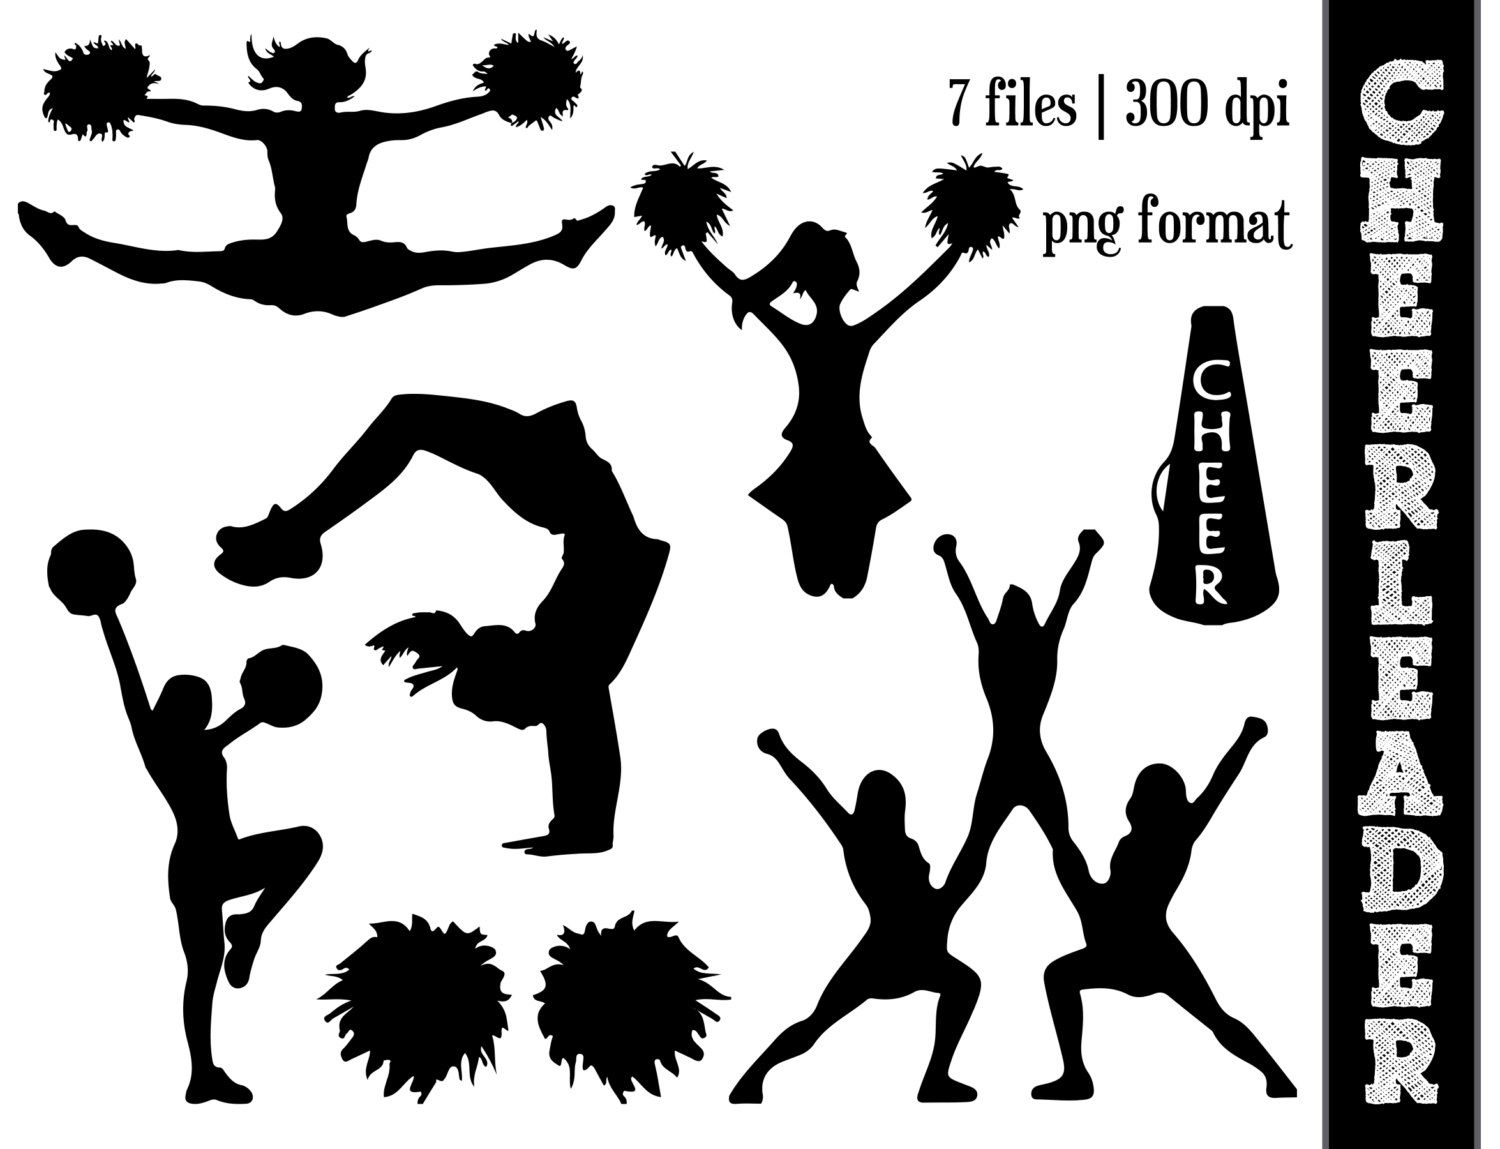 Cheerleading clipart base, Cheerleading base Transparent FREE for